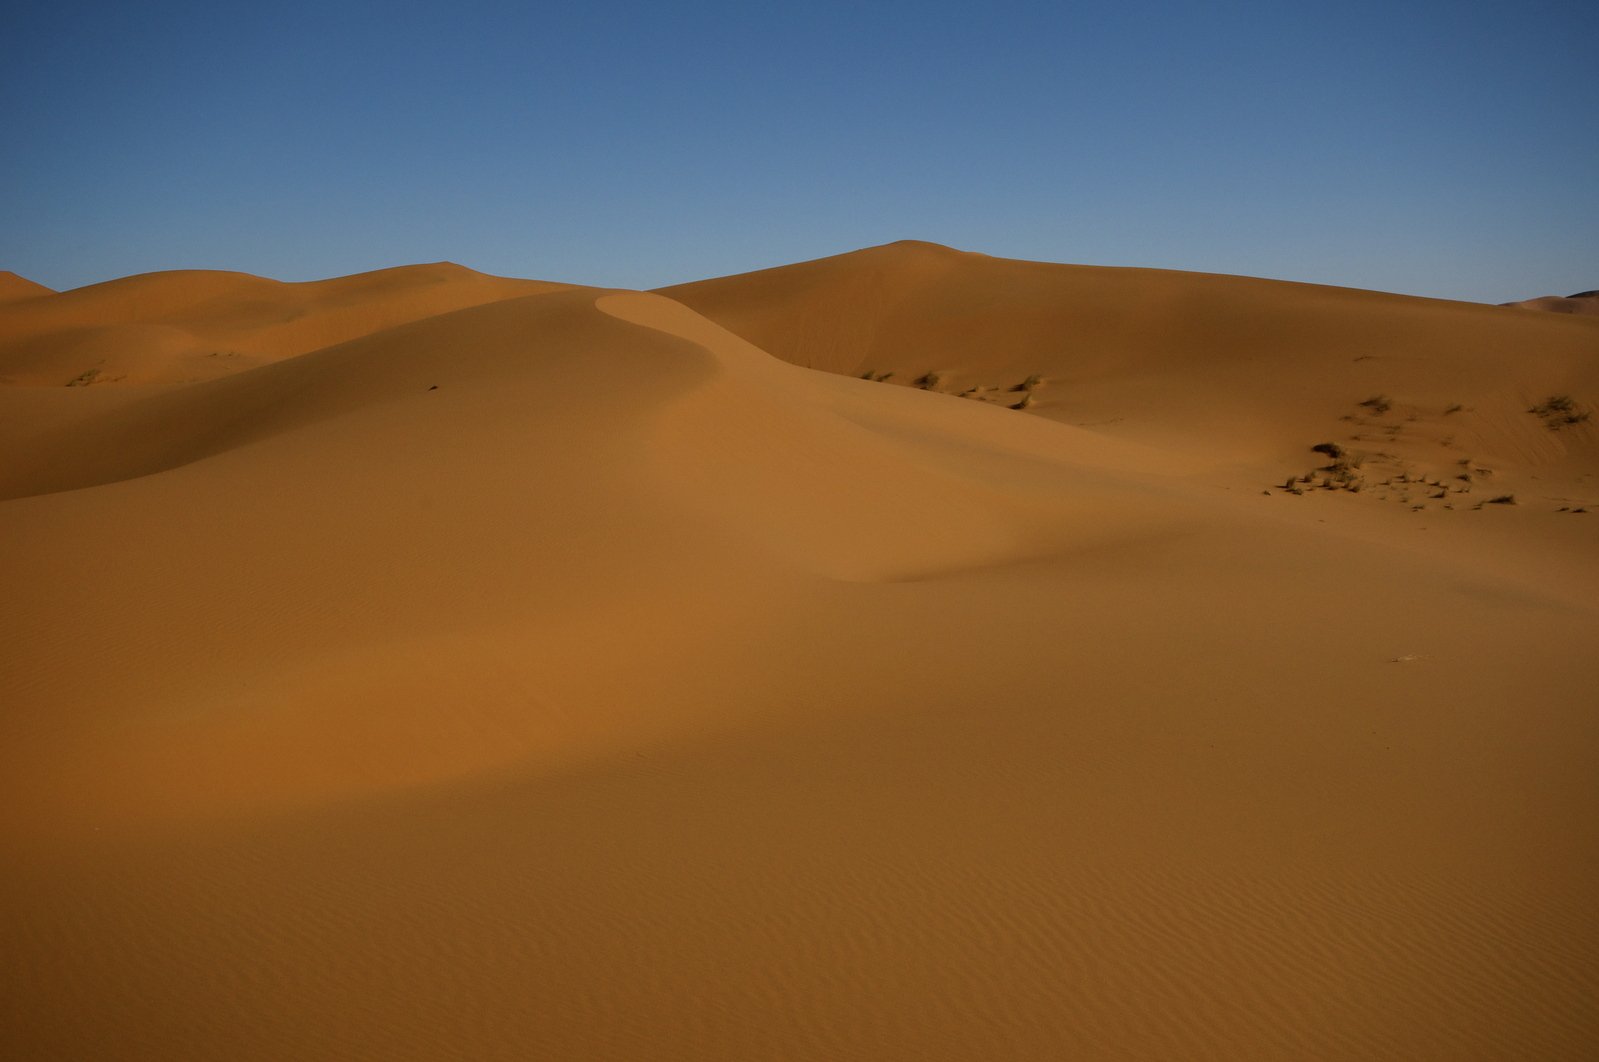 large, tan dunes in the desert under a clear blue sky